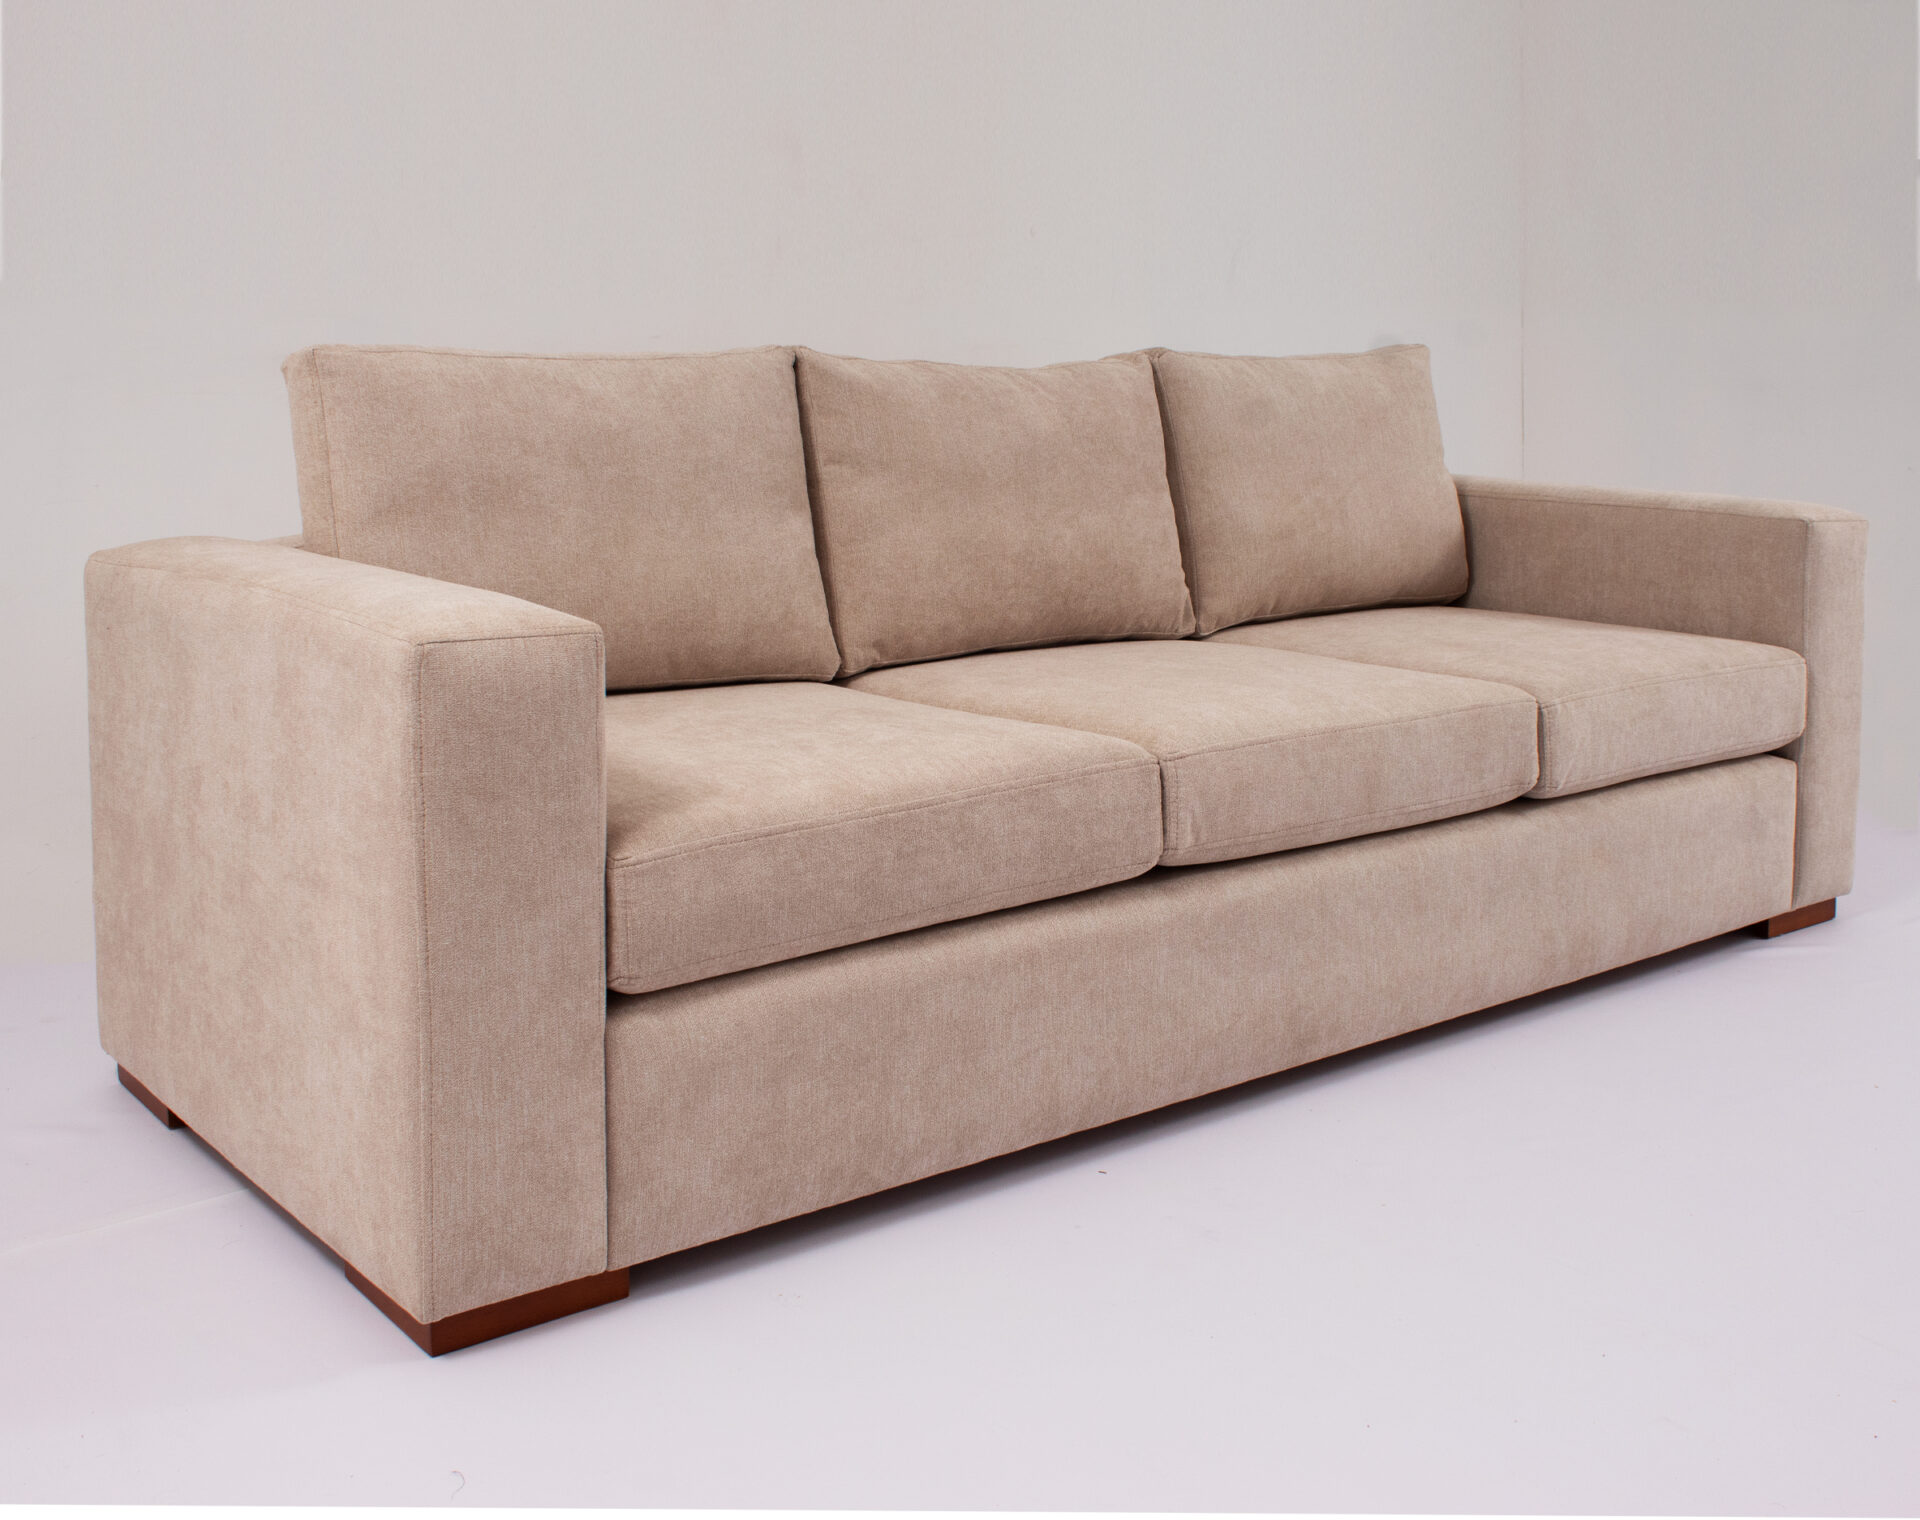 sofa 3 cuerpois finesse beige pata cedro iso